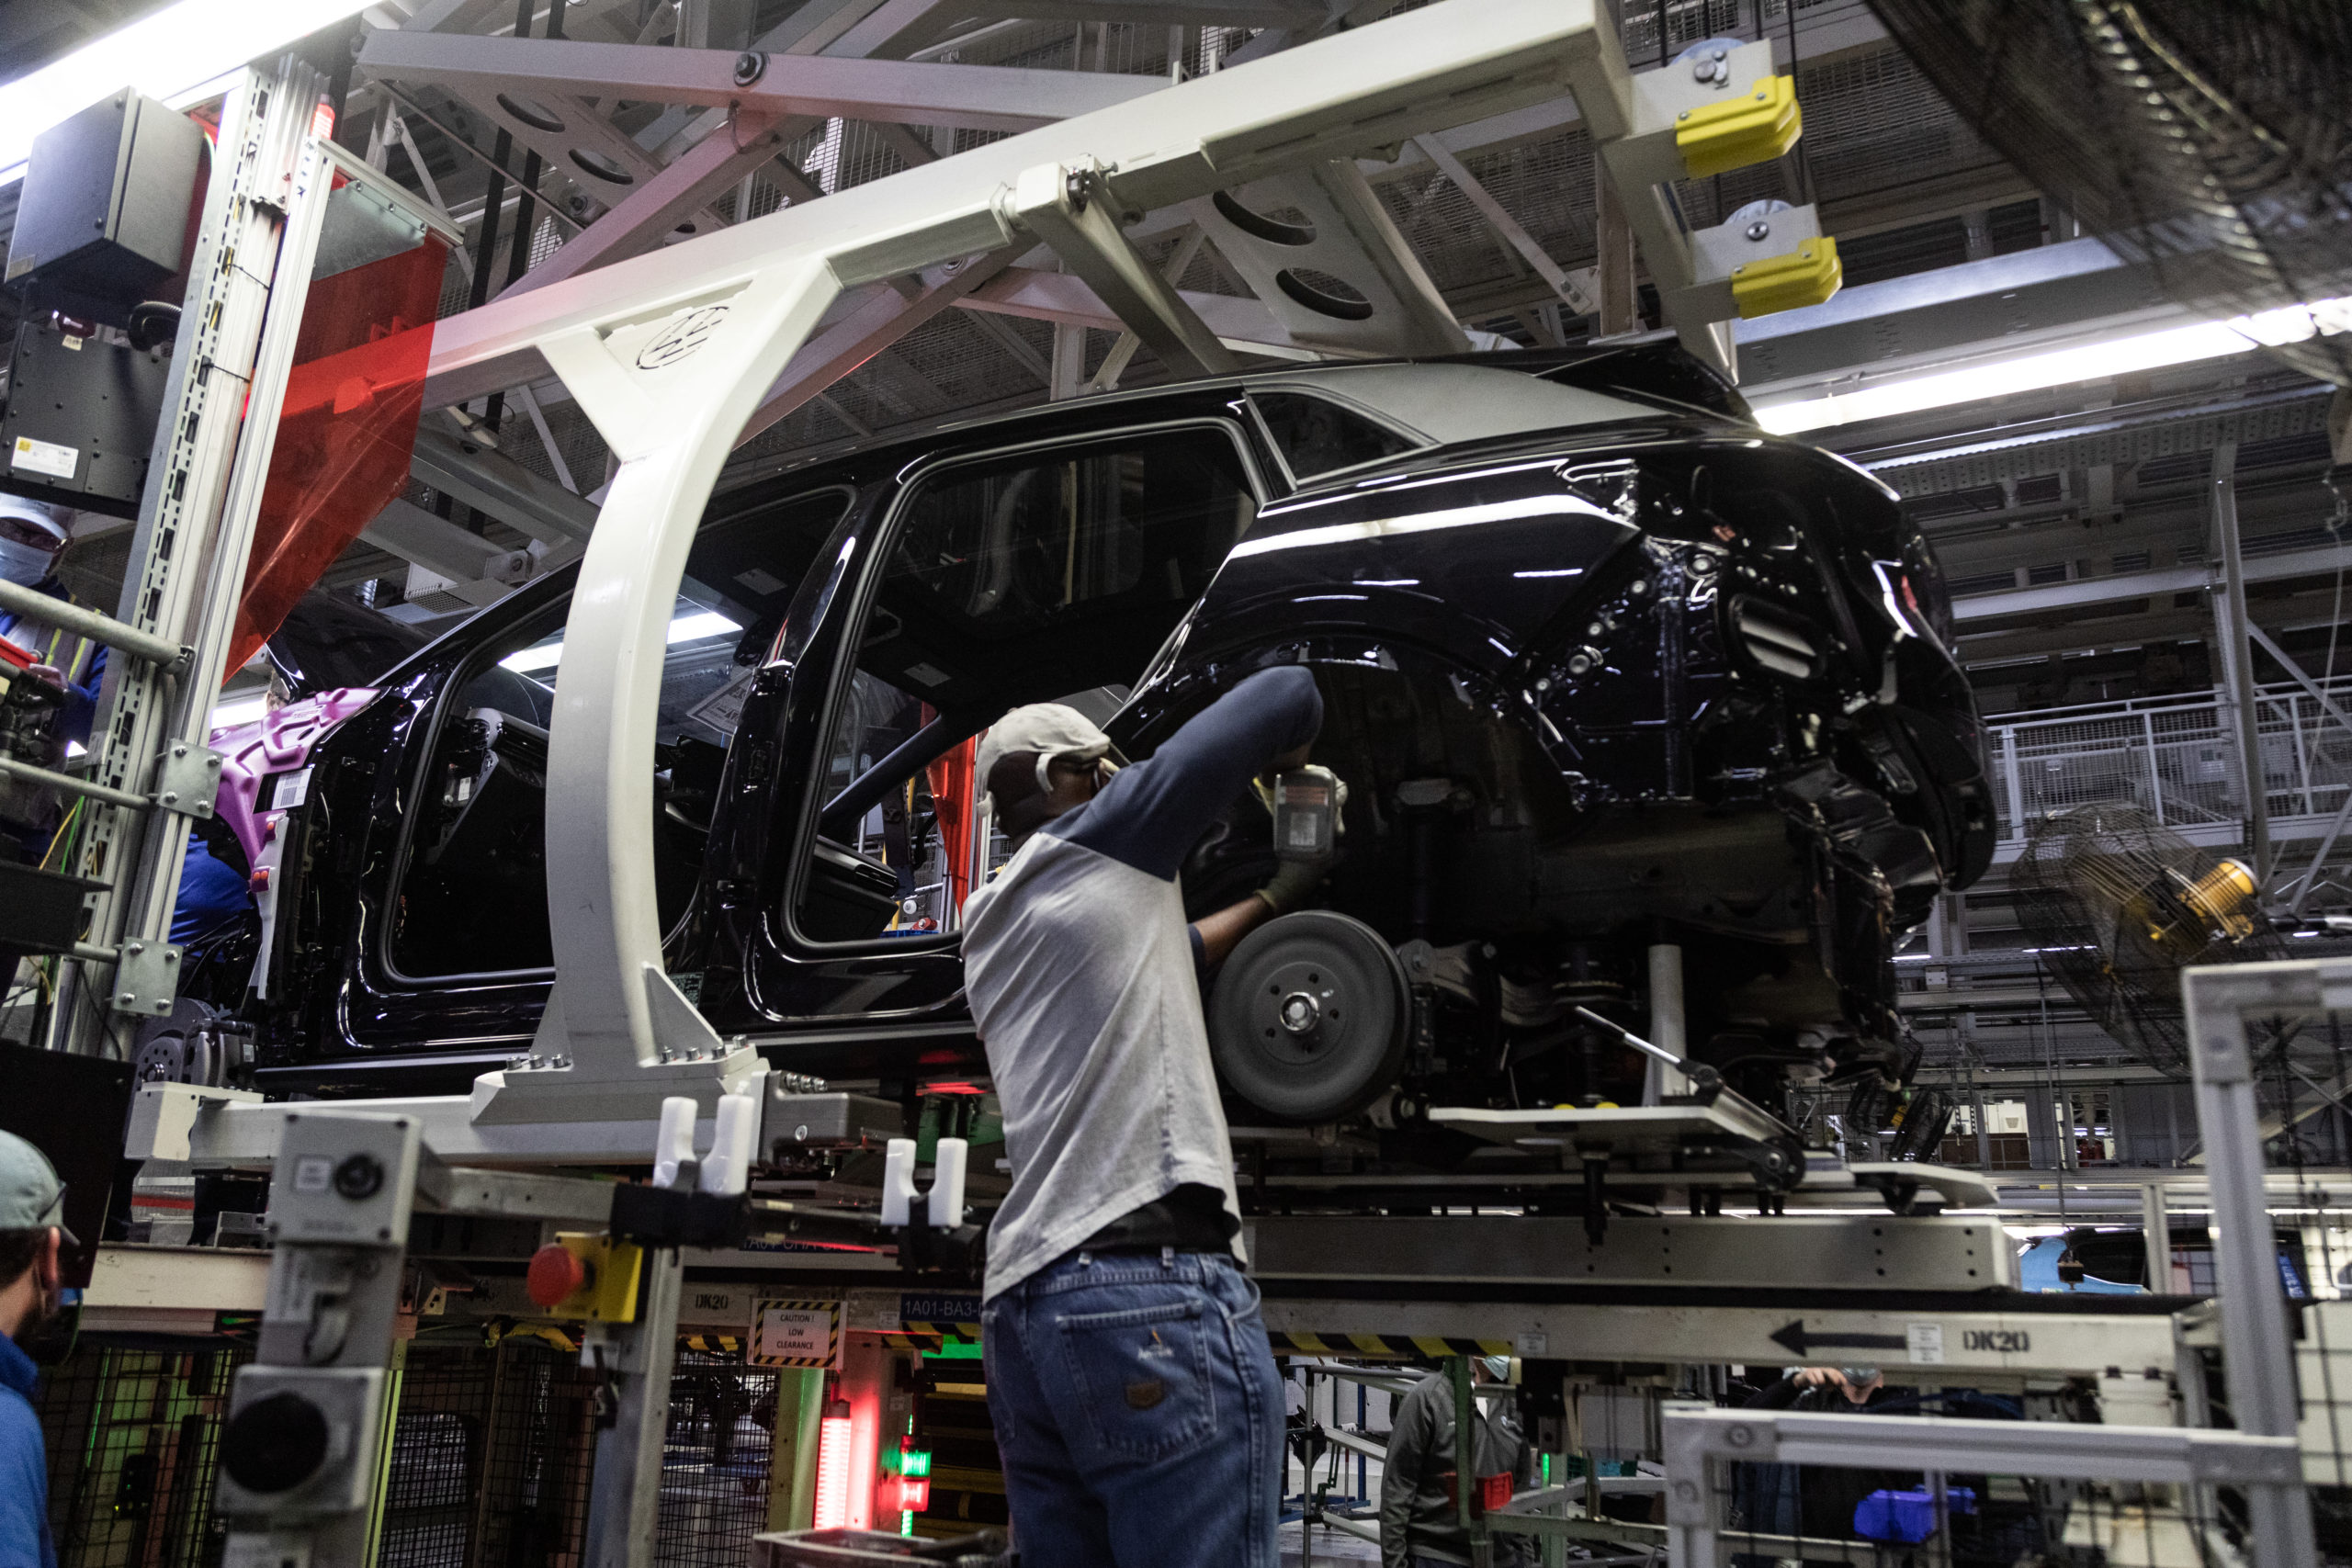 Assembly of Volkswagen’s ID.4 electric SUV at Volkswagen’s Chattanooga, TN, facilities